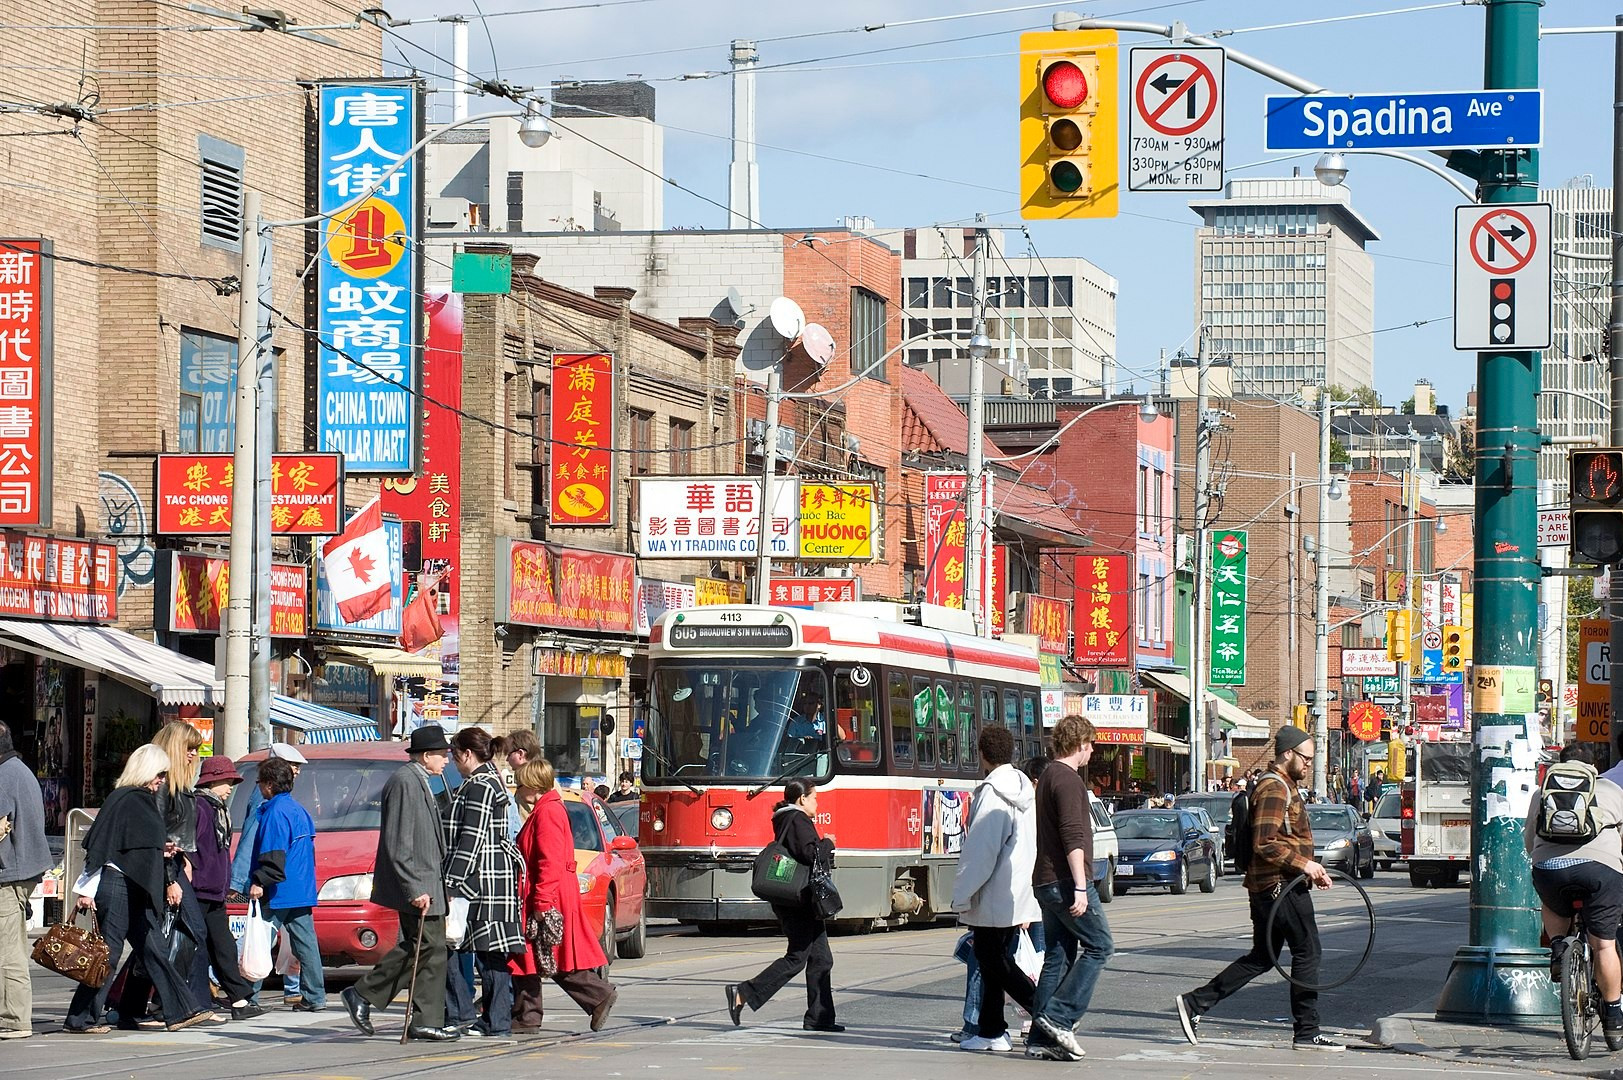 By The City of Toronto from Toronto, Canada - Toronto: Dundas St, Chinatown, CC BY 2.0, https://commons.wikimedia.org/w/index.php?curid=47738178